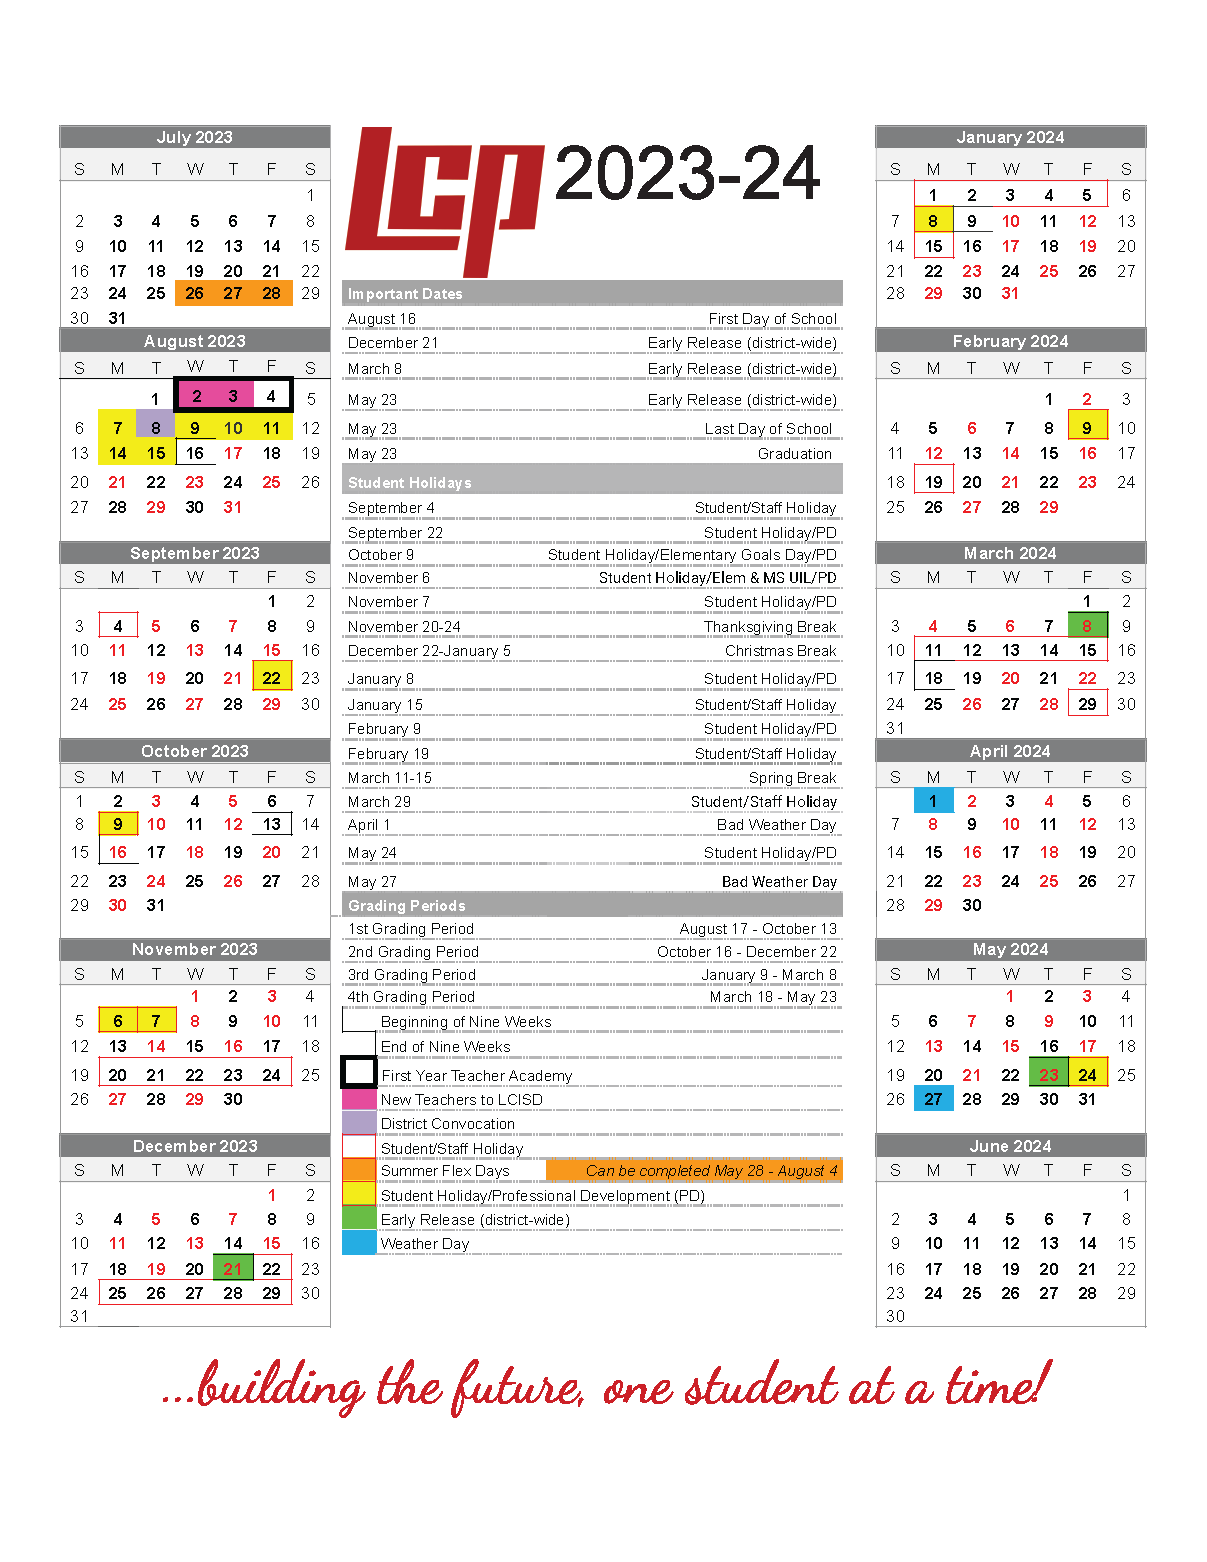 district and elementary calendar 2023-24